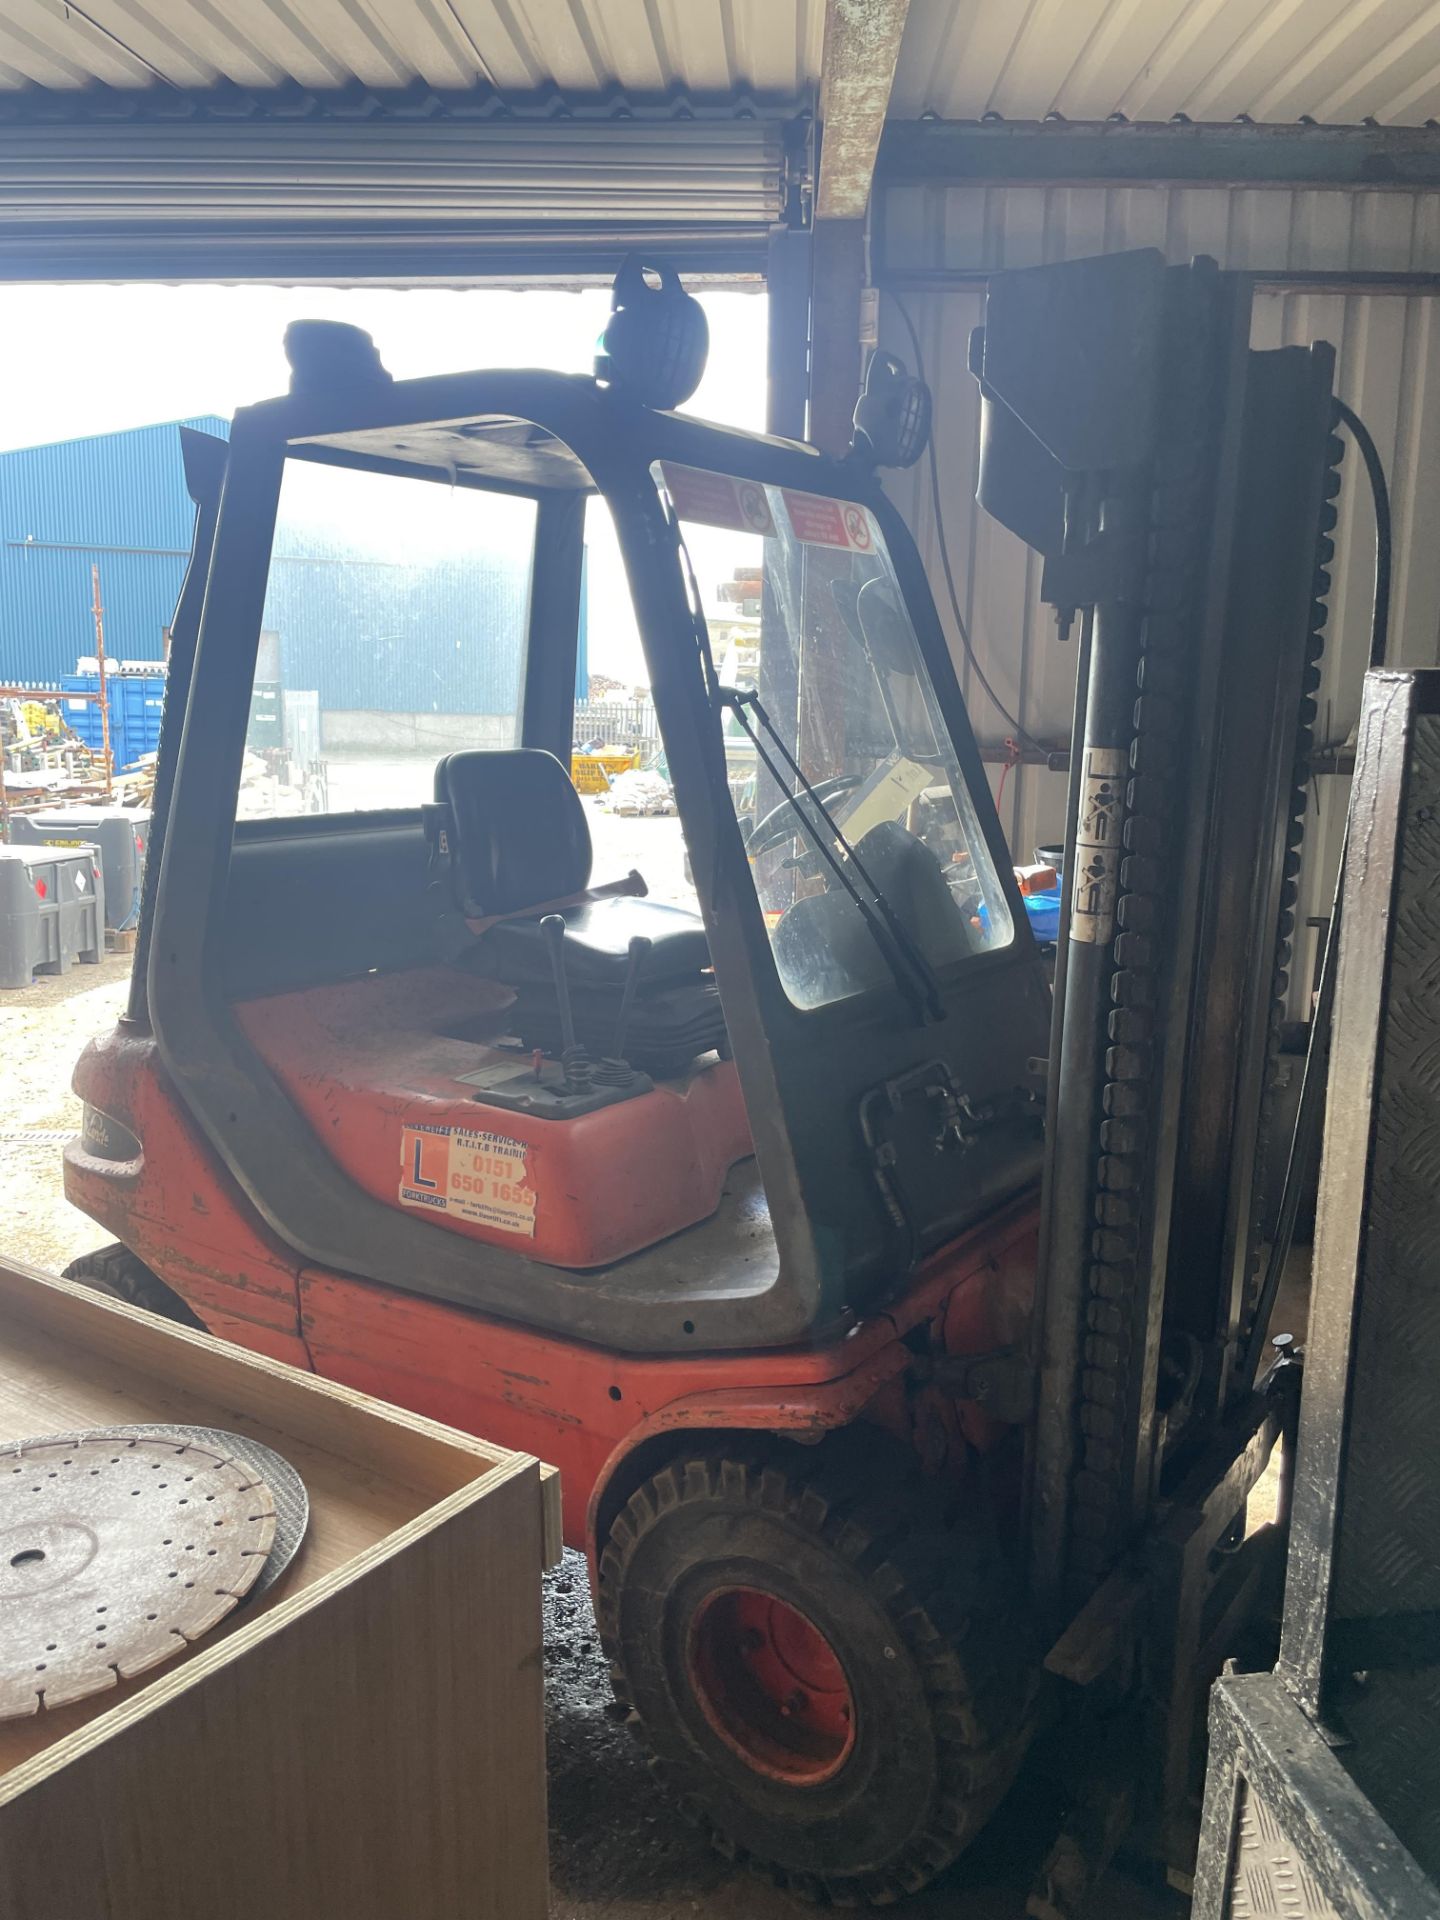 Linde H25D 2500kg cap. DIESEL FORK LIFT TRUCK, serial no. 351E07030625, indicated hours 12589 (at - Image 2 of 7